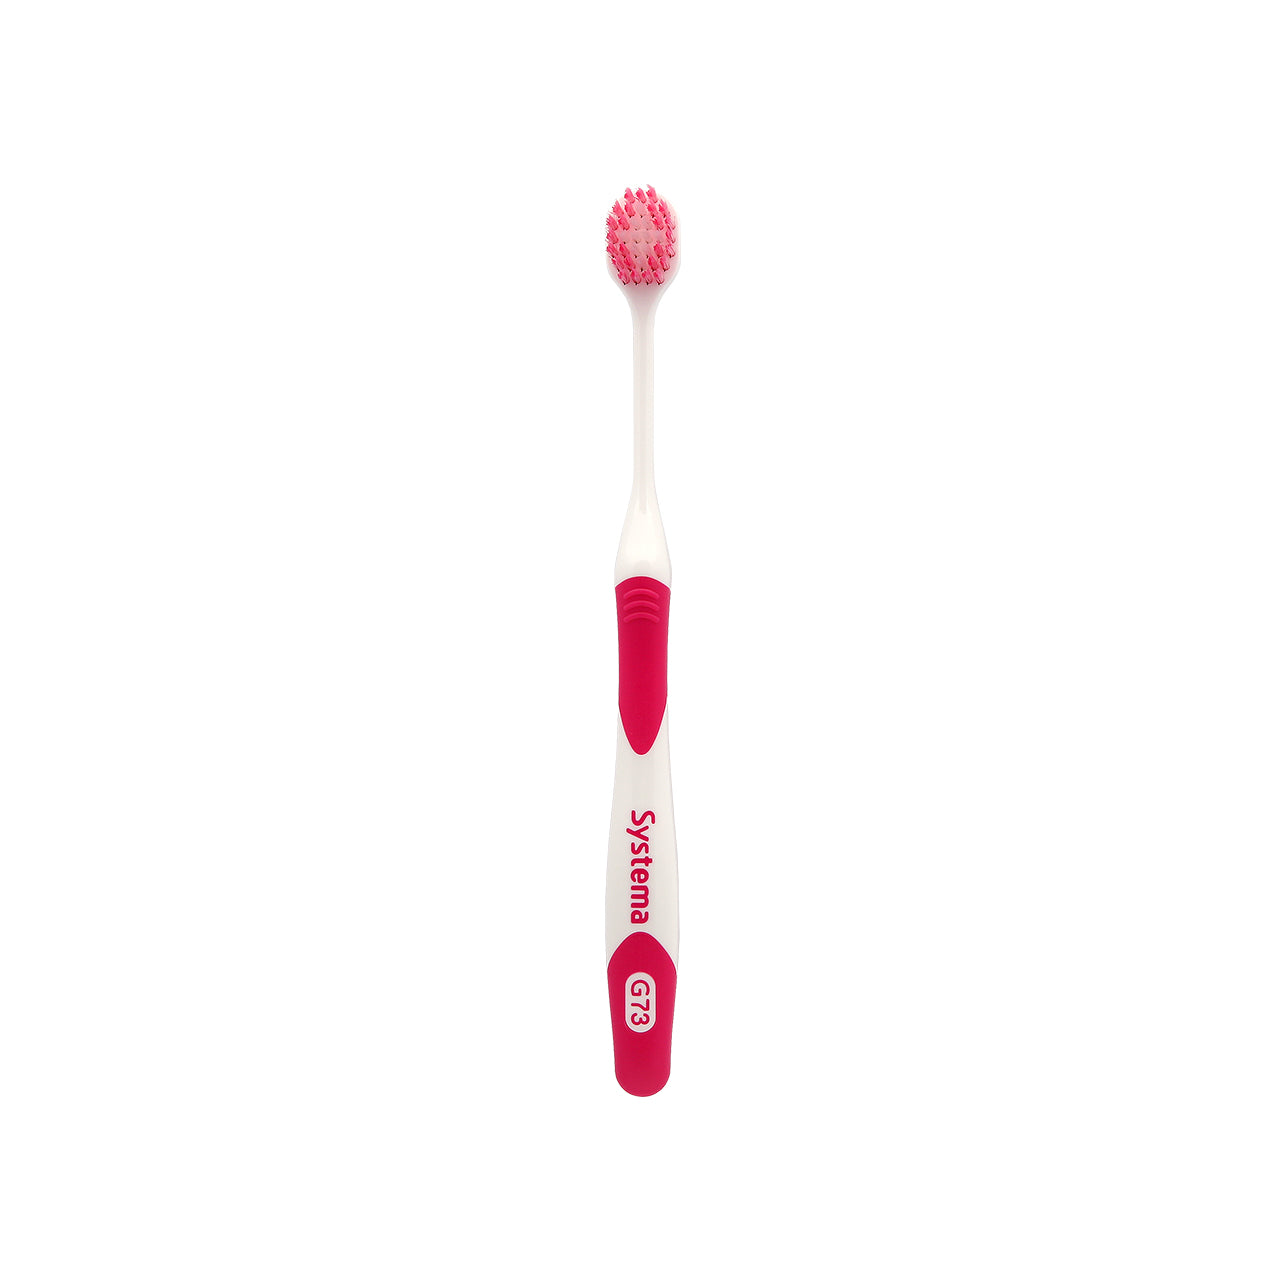 Lion Systema Wide High Density Toothbrush G73 Soft 1pc